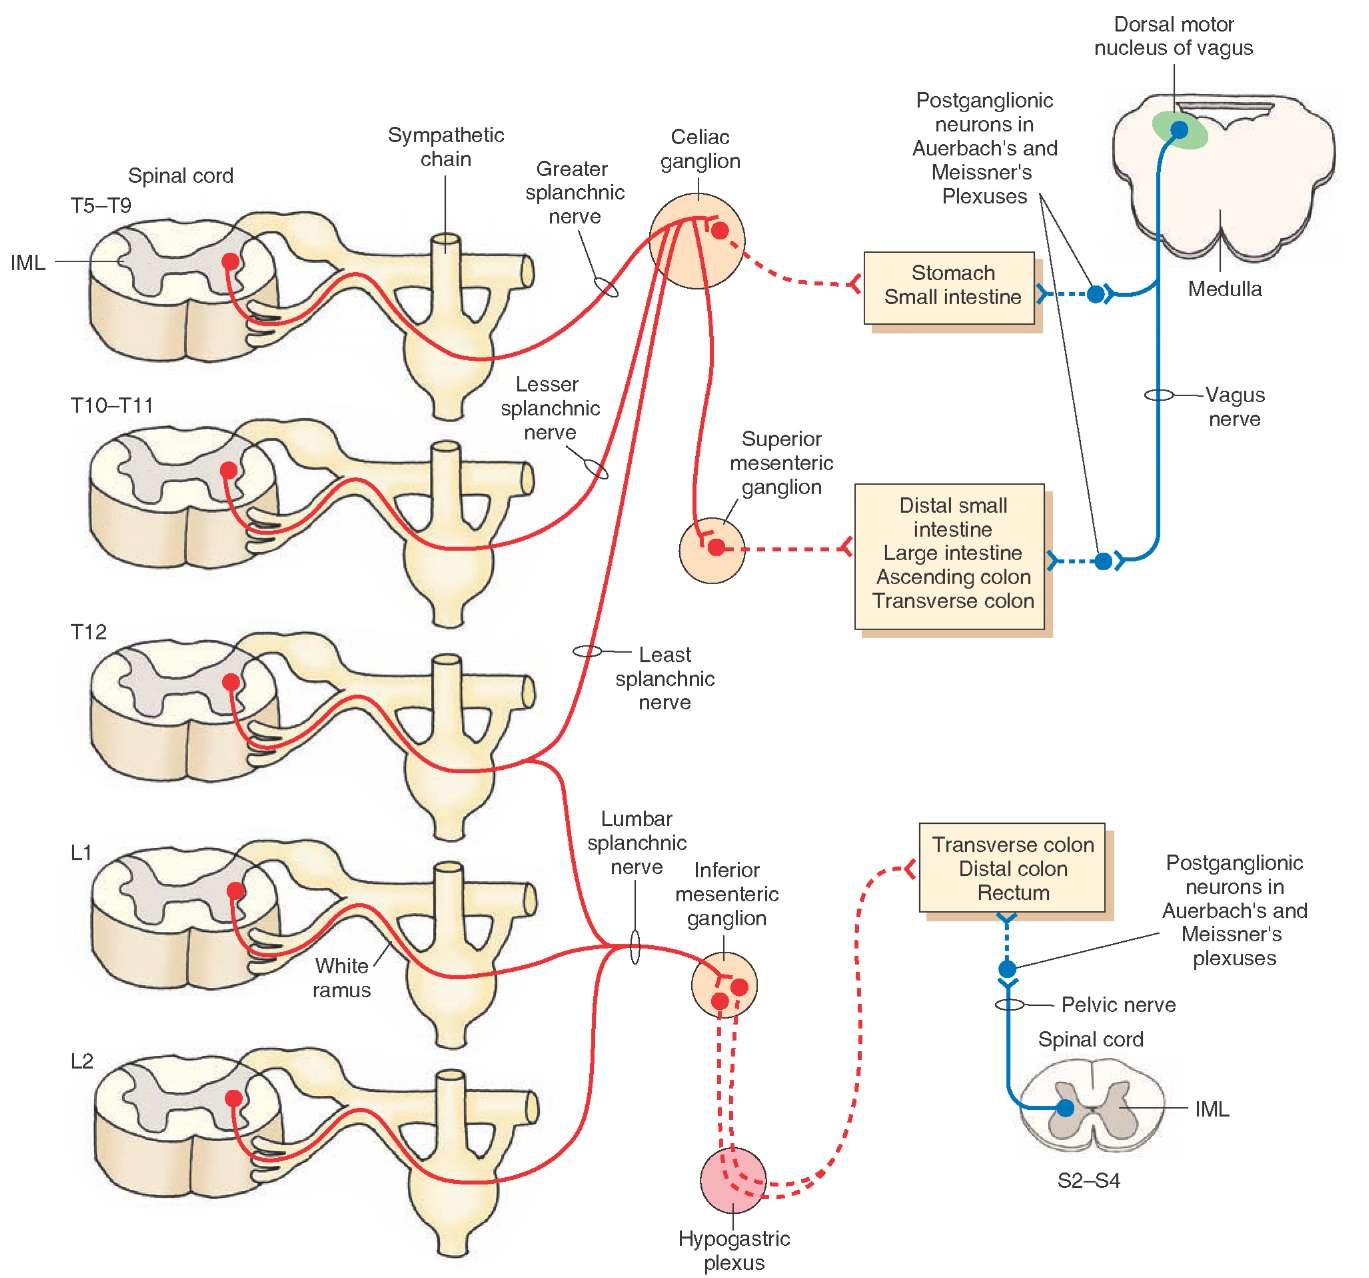 The Neuroendocrine System of the Gut and the Brain-Gut Axis (Gut-Brain